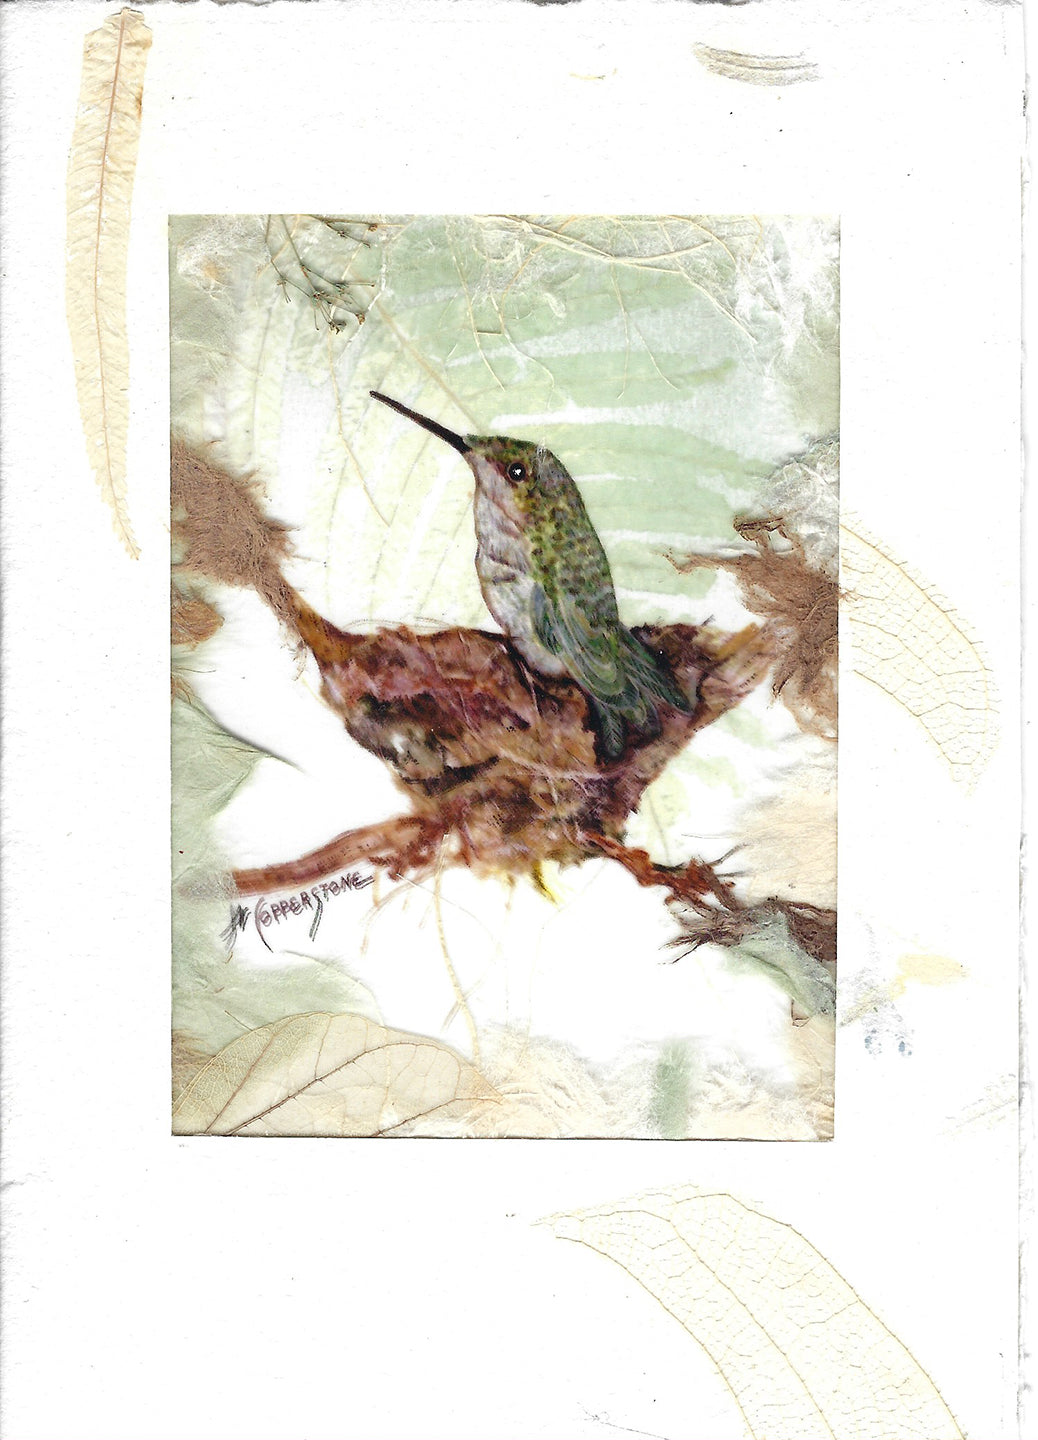 Hummingbird Perched on Nest - Mixed media fine art print by Janice A. Copperstone of Milford, Mich.  This unique piece of art features a watercolor painting of a bird printed on transparency with a handmade paper background and embellished archival mat board. 